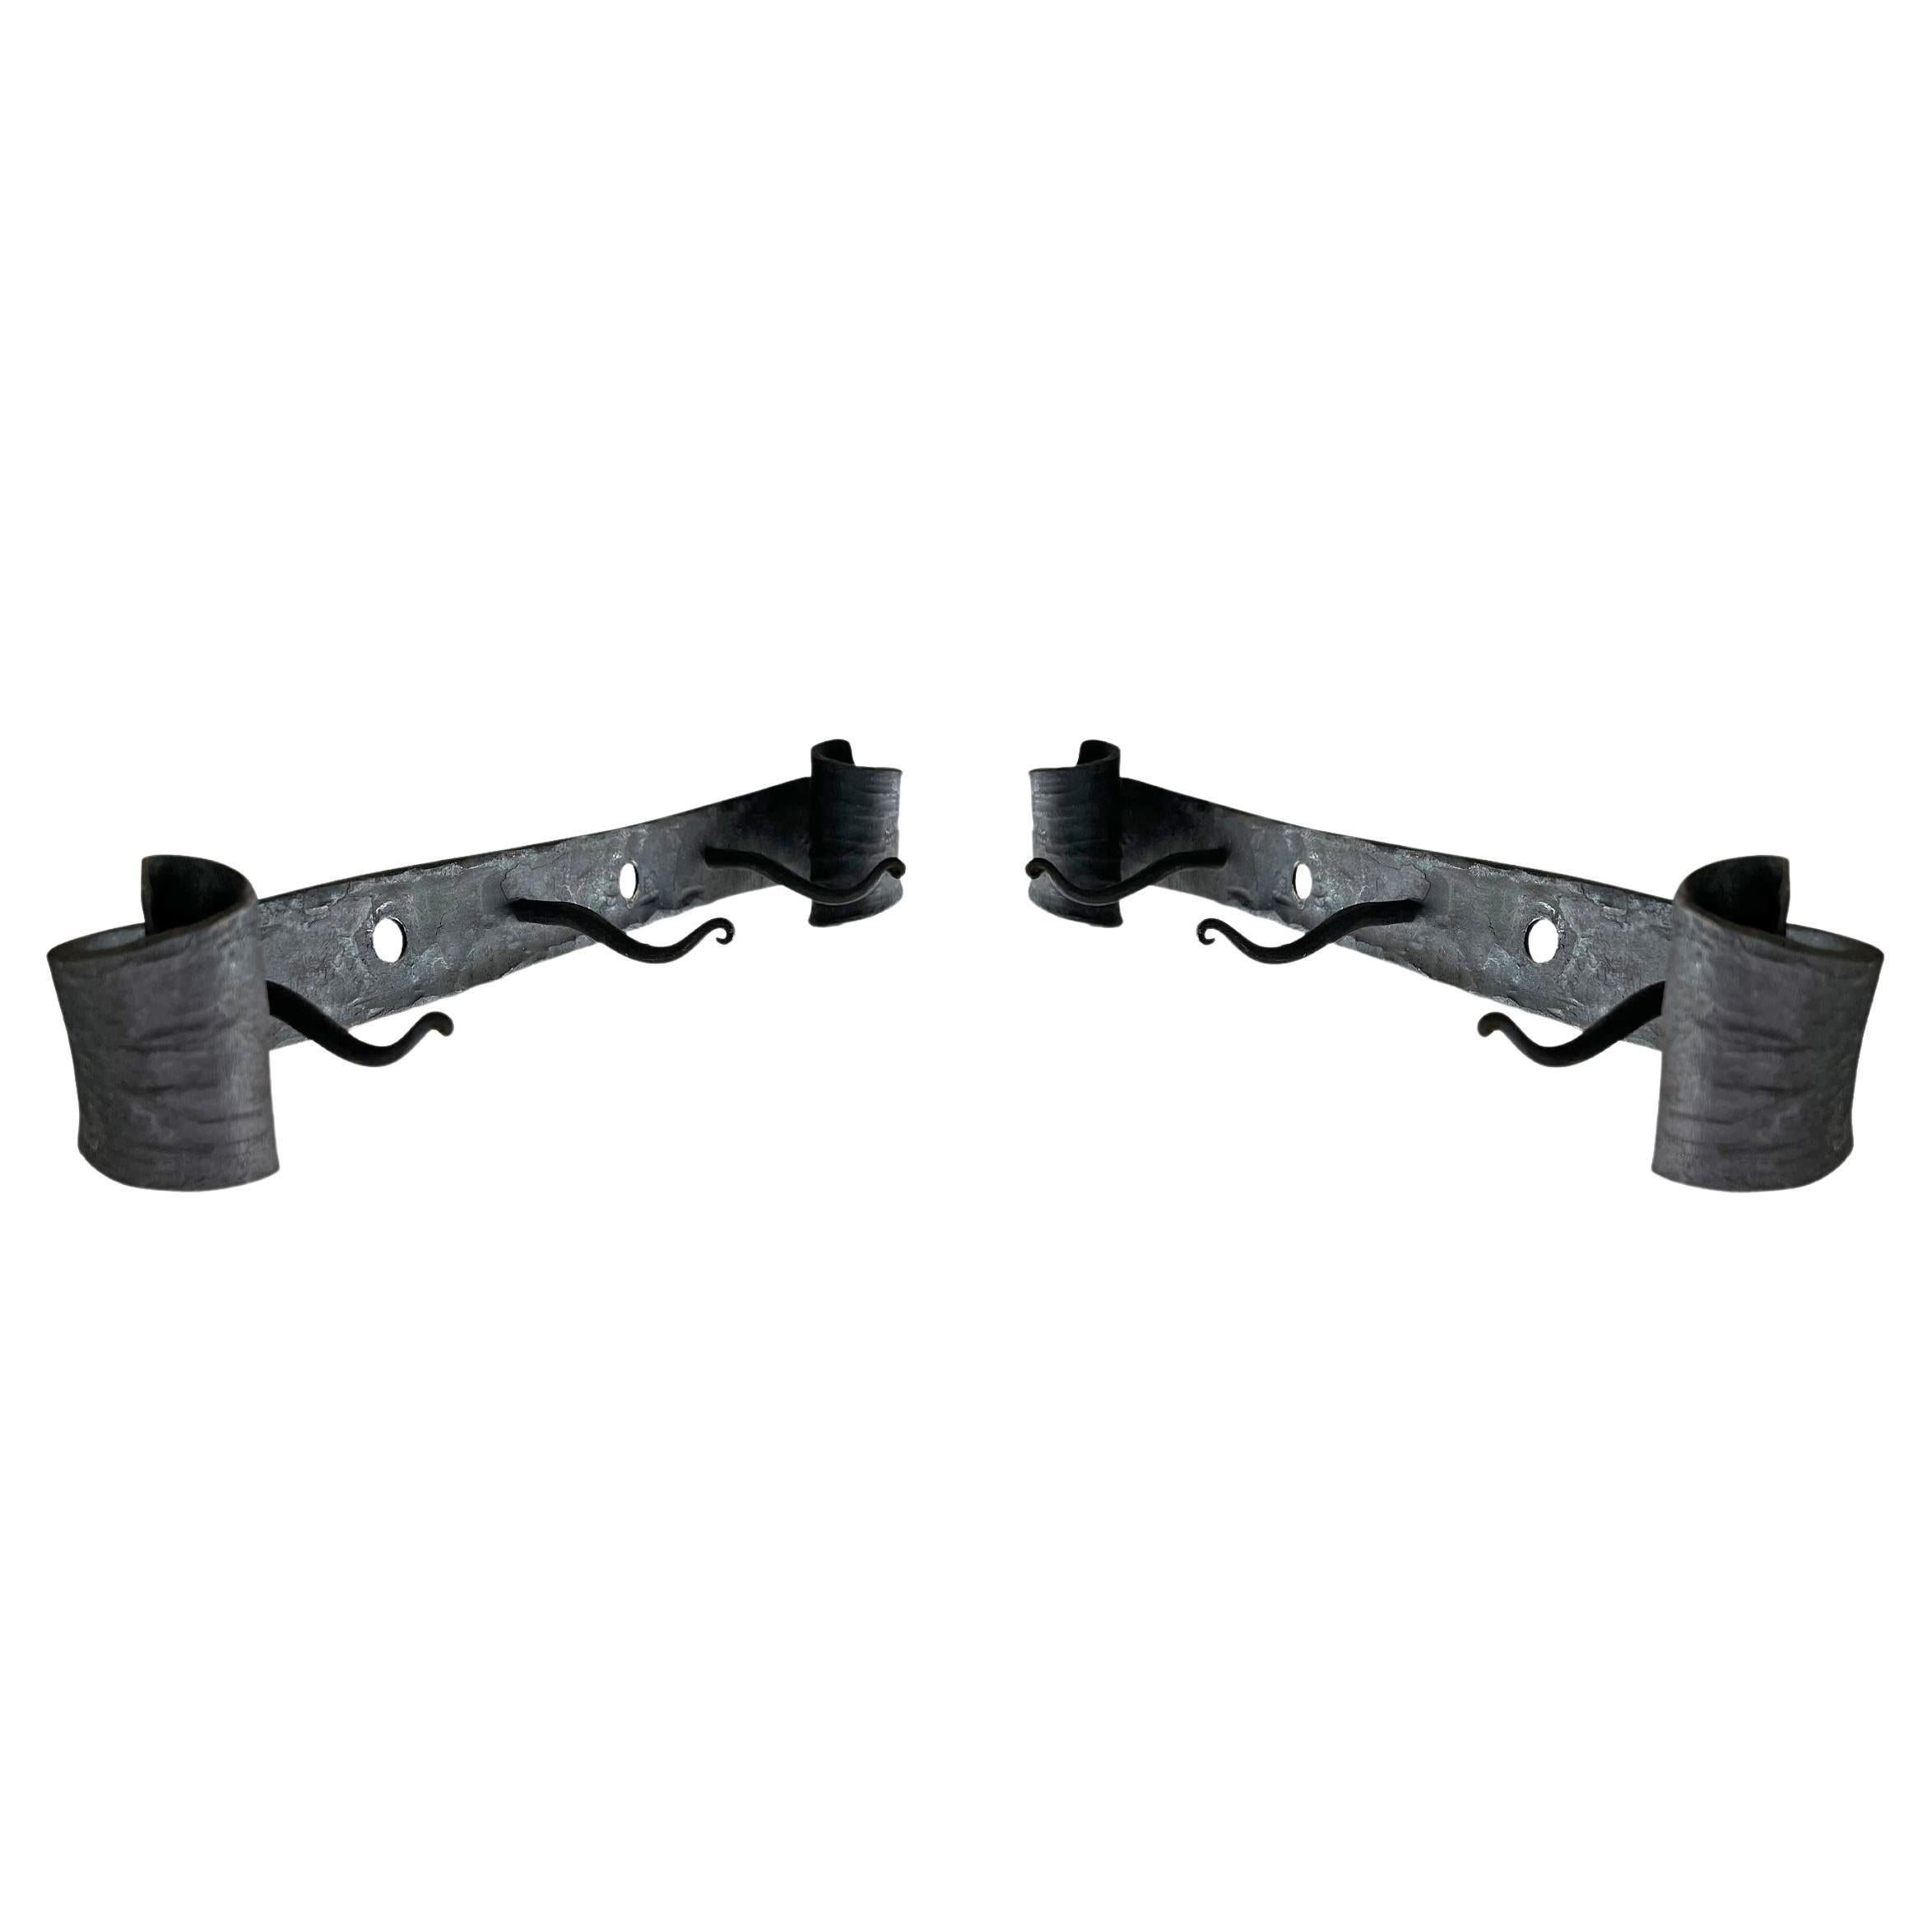 Pair of Early 20th Century Hand-Wrought Iron Wall Hooks